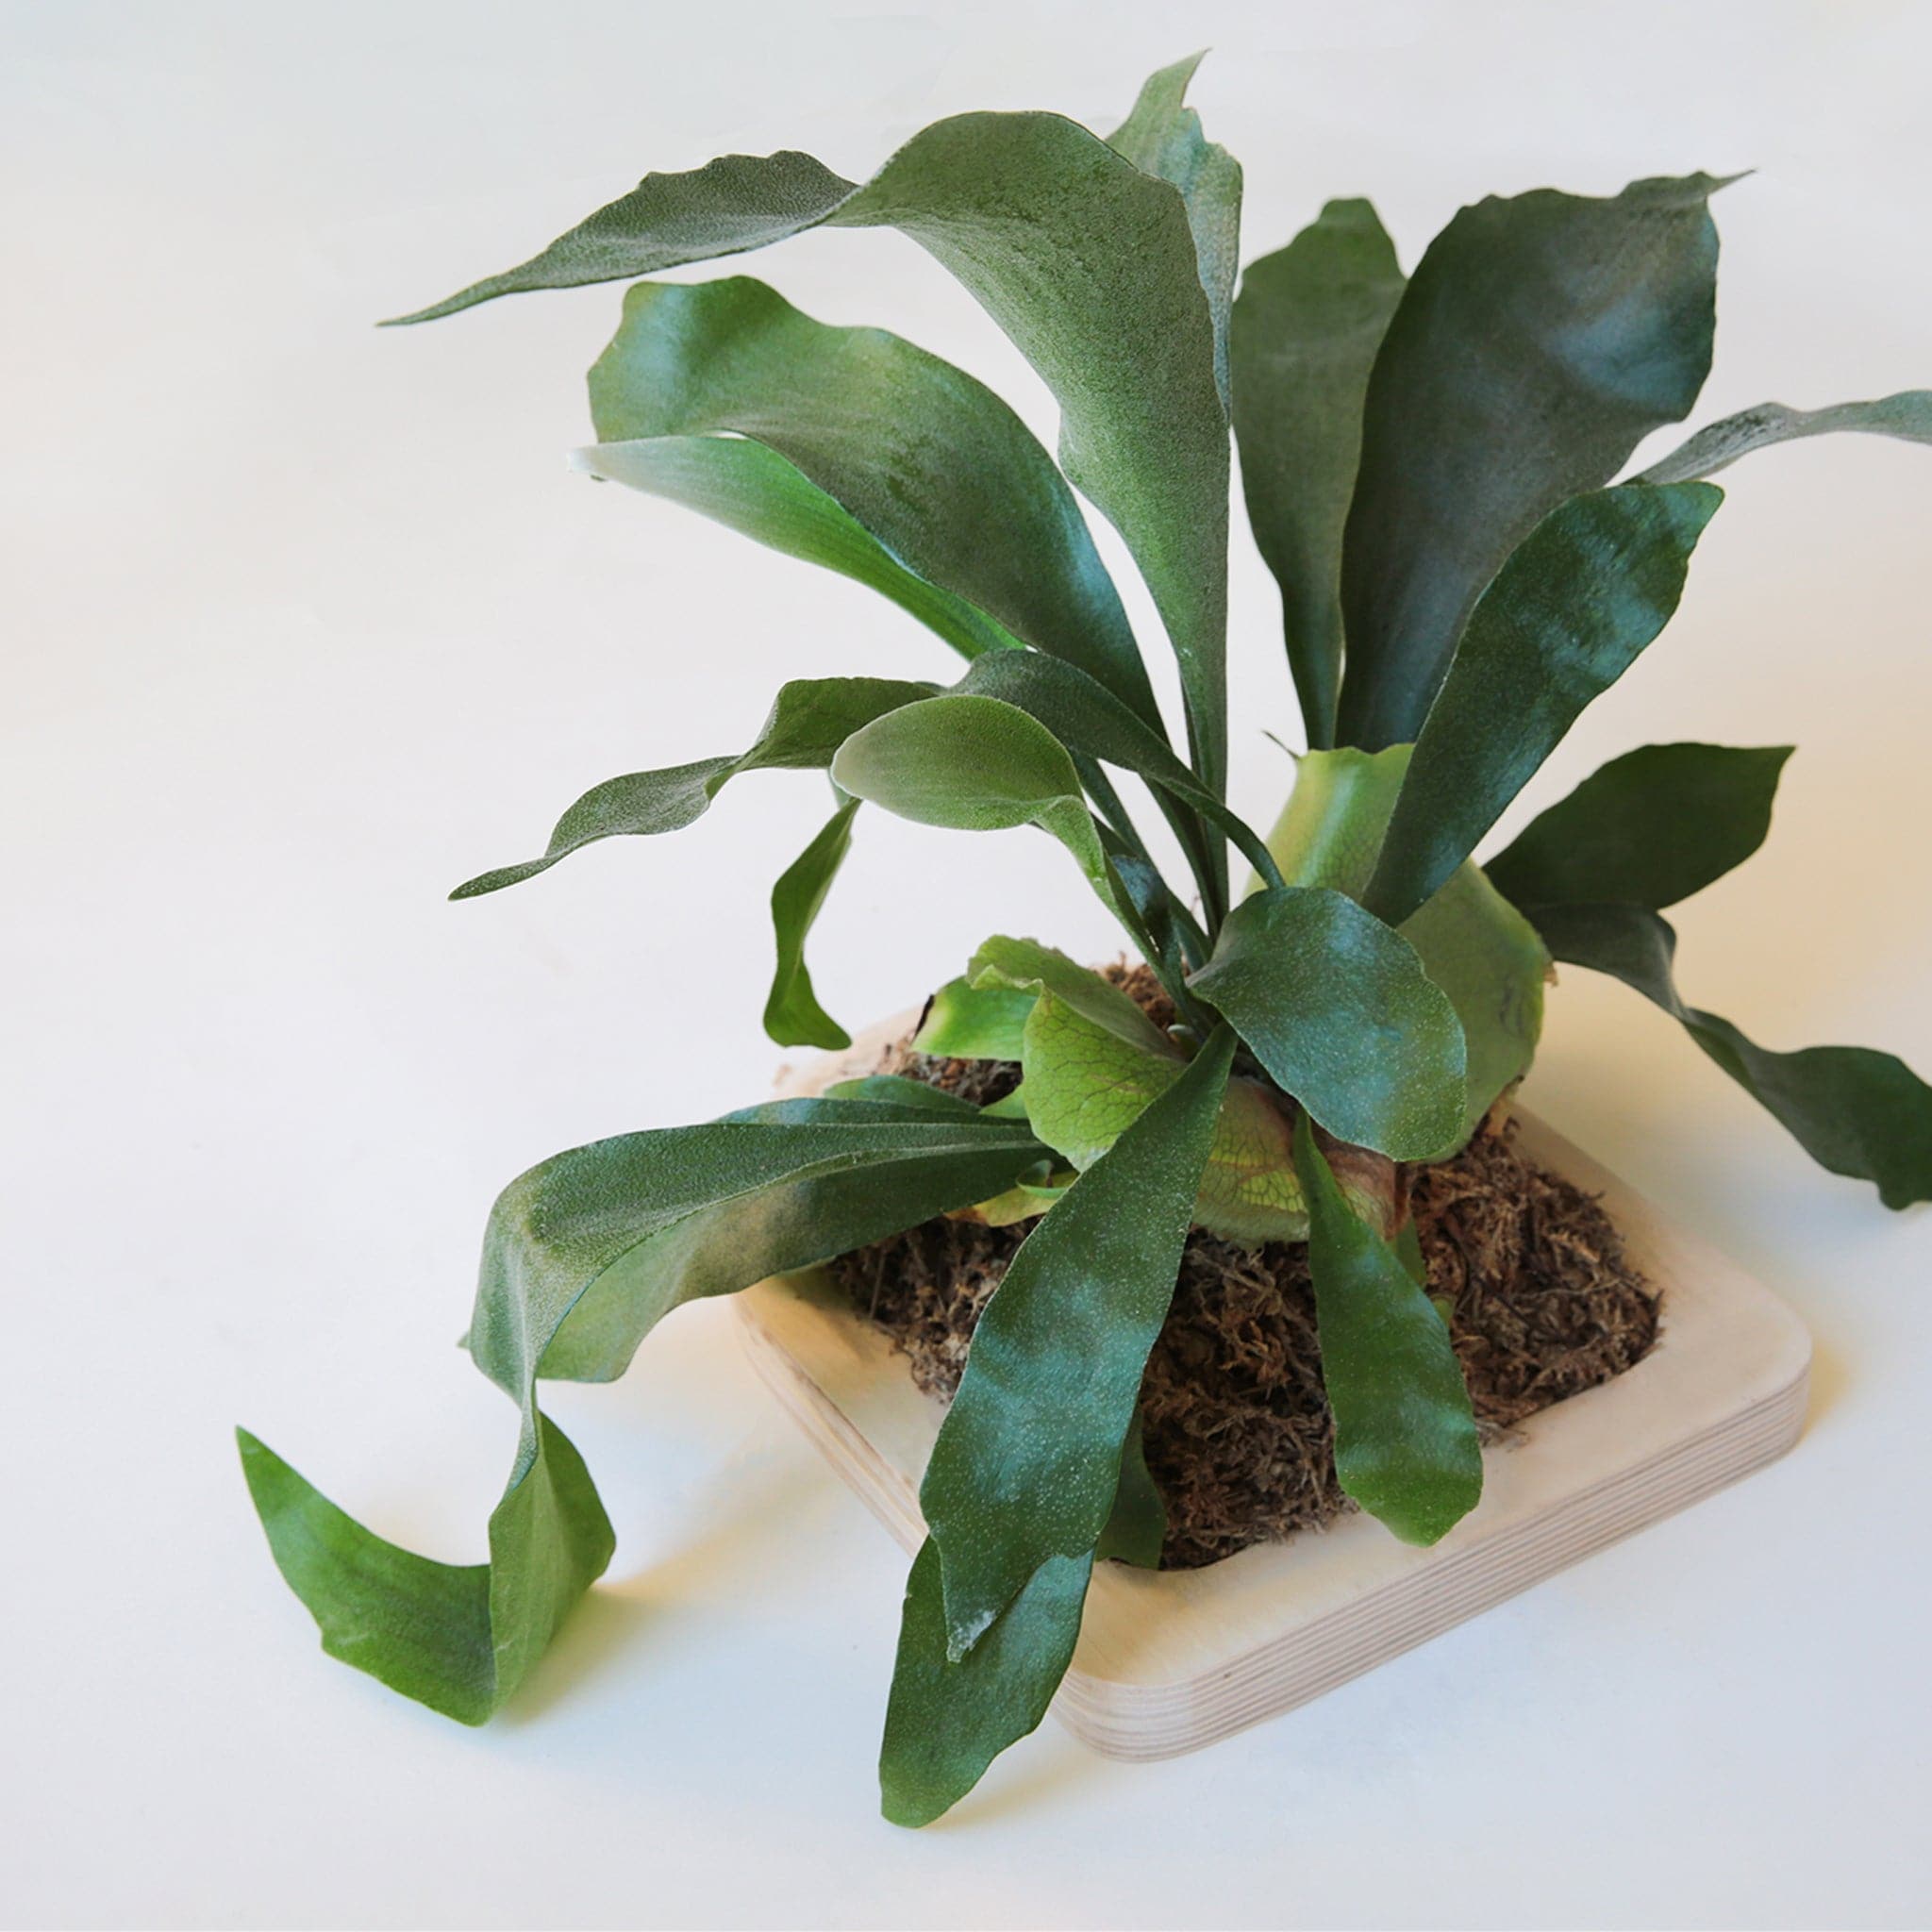 Against a white background is the top view of a mounted staghorn fern. The fern is mounted to a peach colored, arch frame. The inside of the frame is brown with long, dark green leaves. The middle leaves are sticking straight up and the side leaves drape down. 